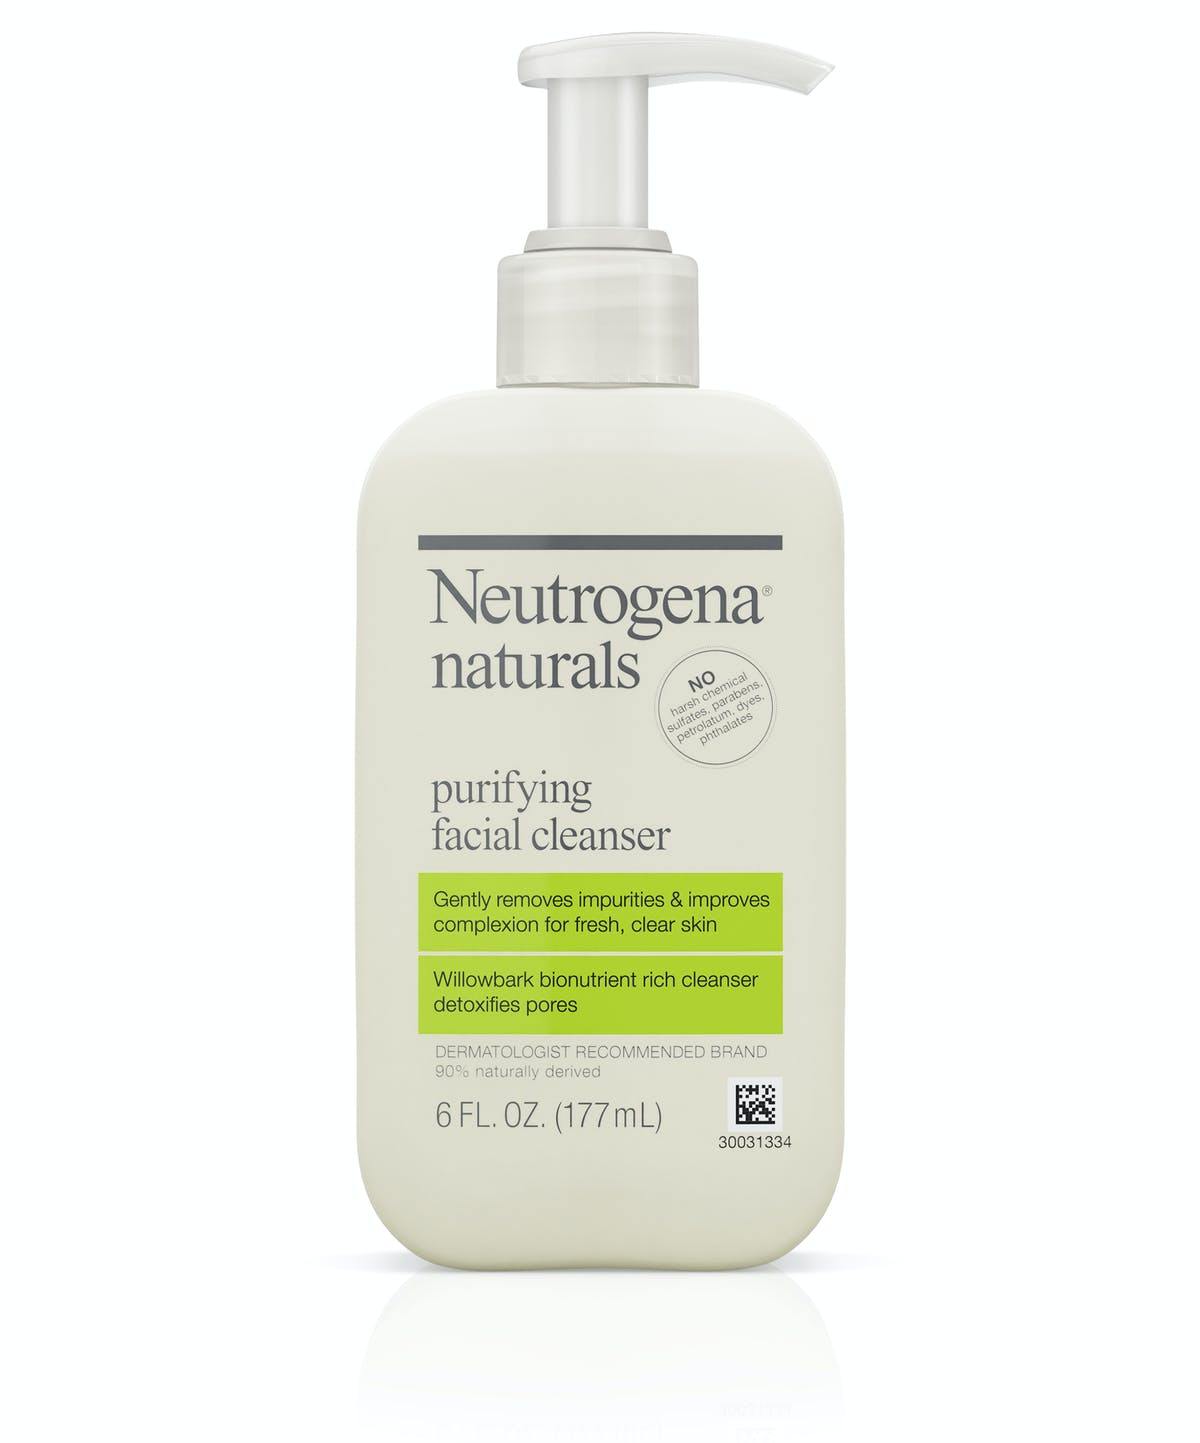 Neutrogena Natural Purifying Facial Cleanser